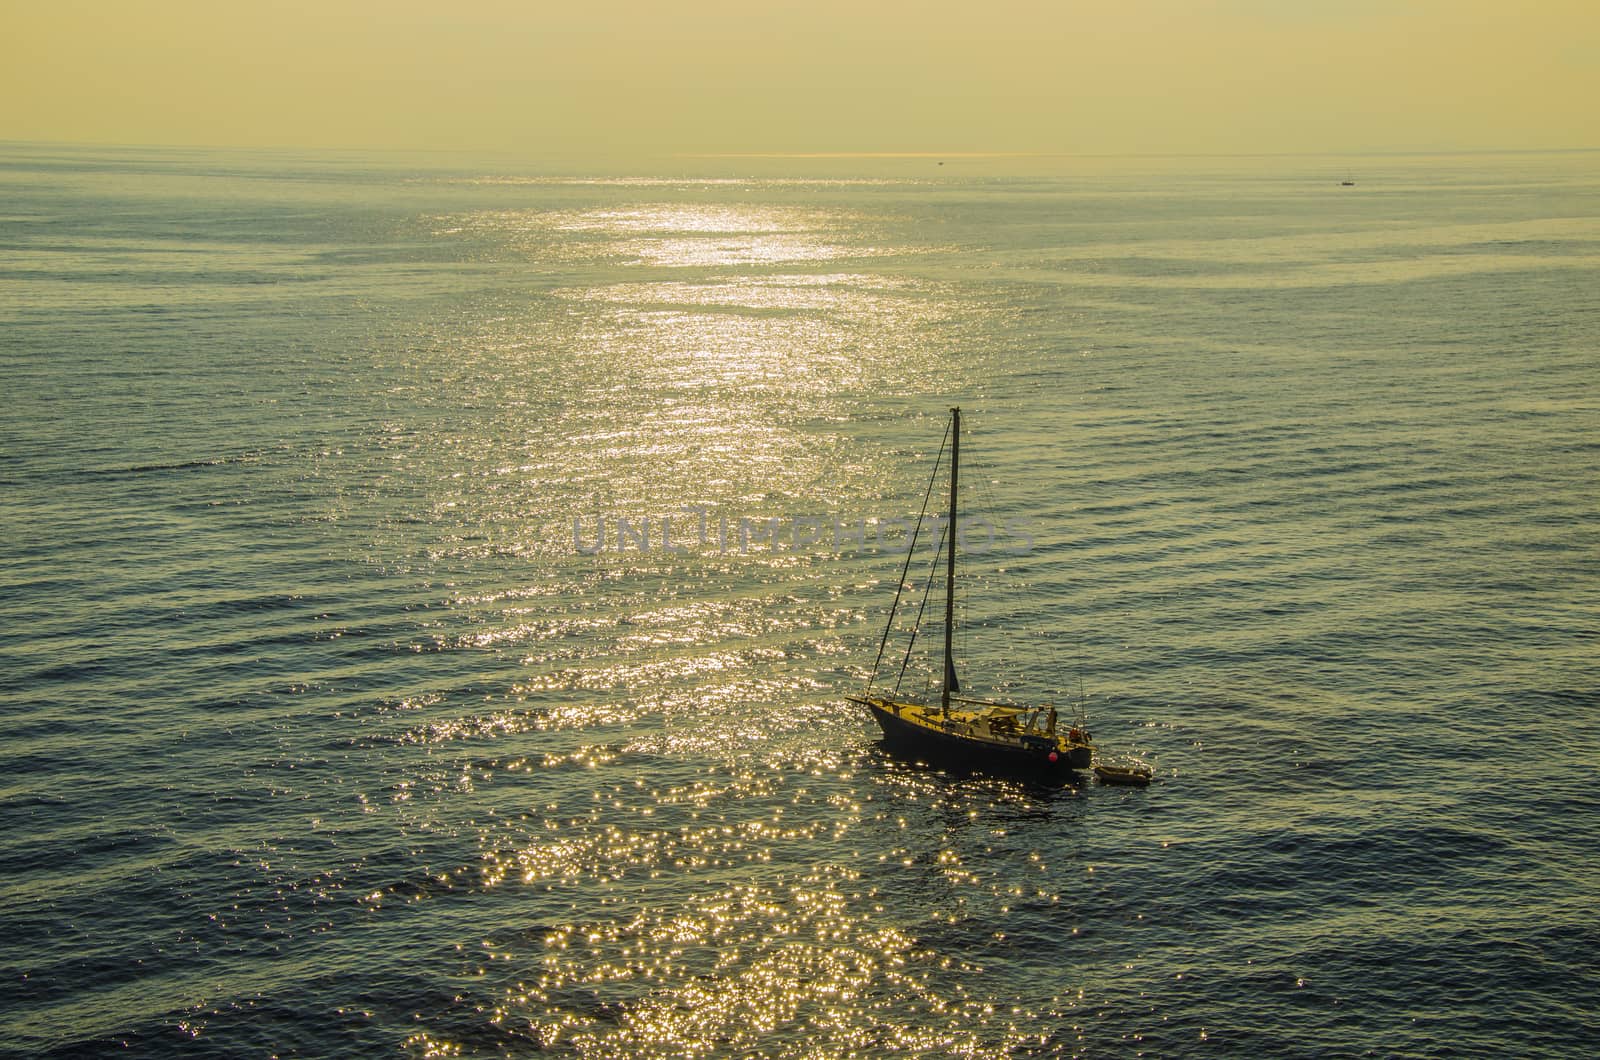 Sunset and sailboat accompanied by his boat in peaceful waters in the Tyrrhenian Sea